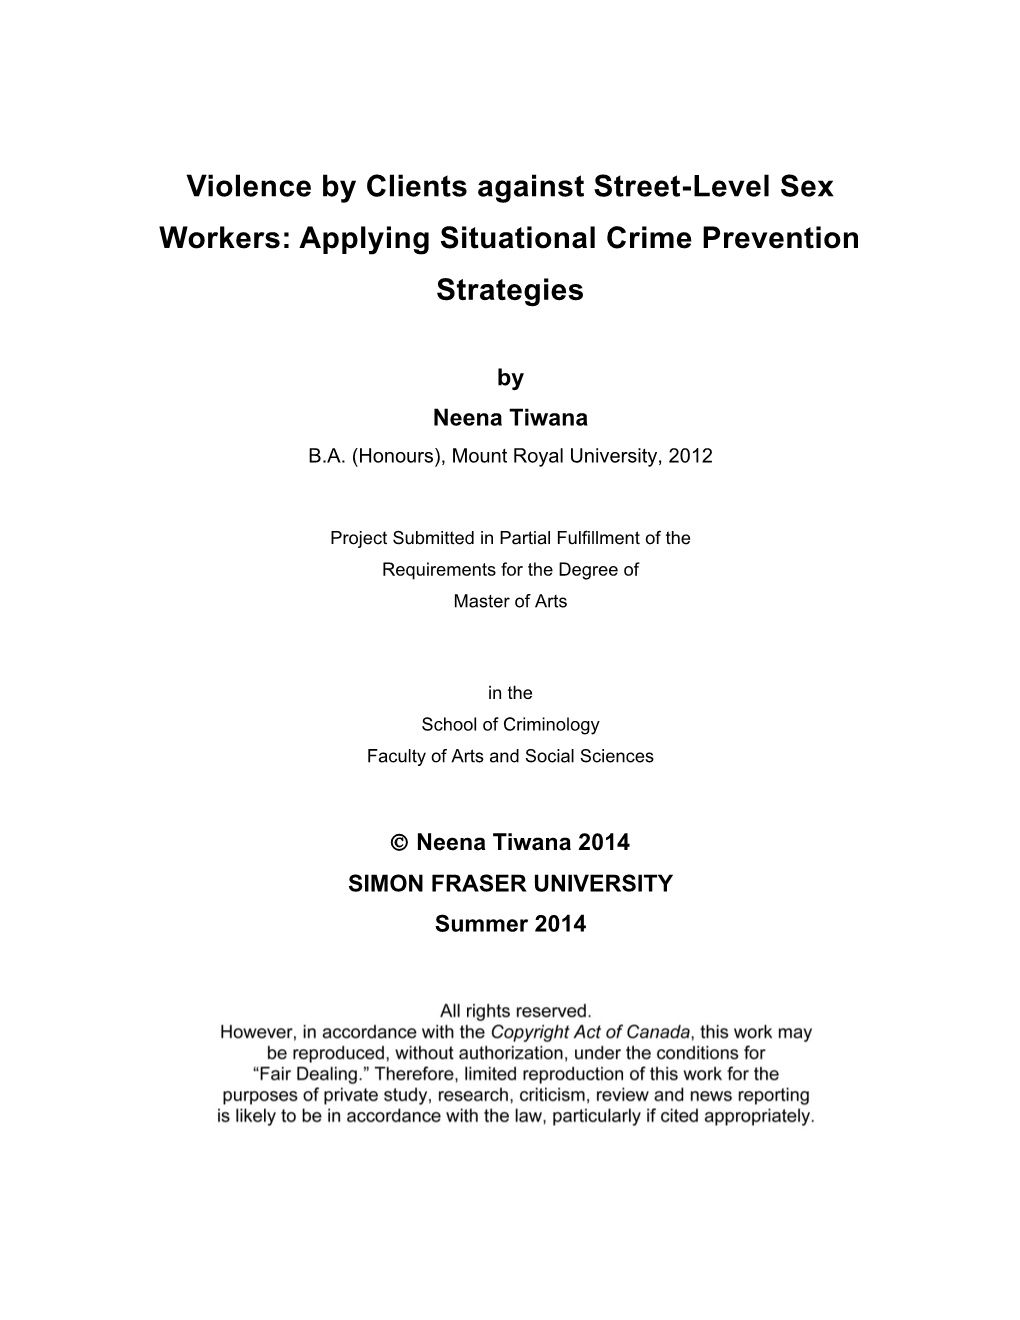 Violence by Clients Against Street-Level Sex Workers: Applying Situational Crime Prevention Strategies